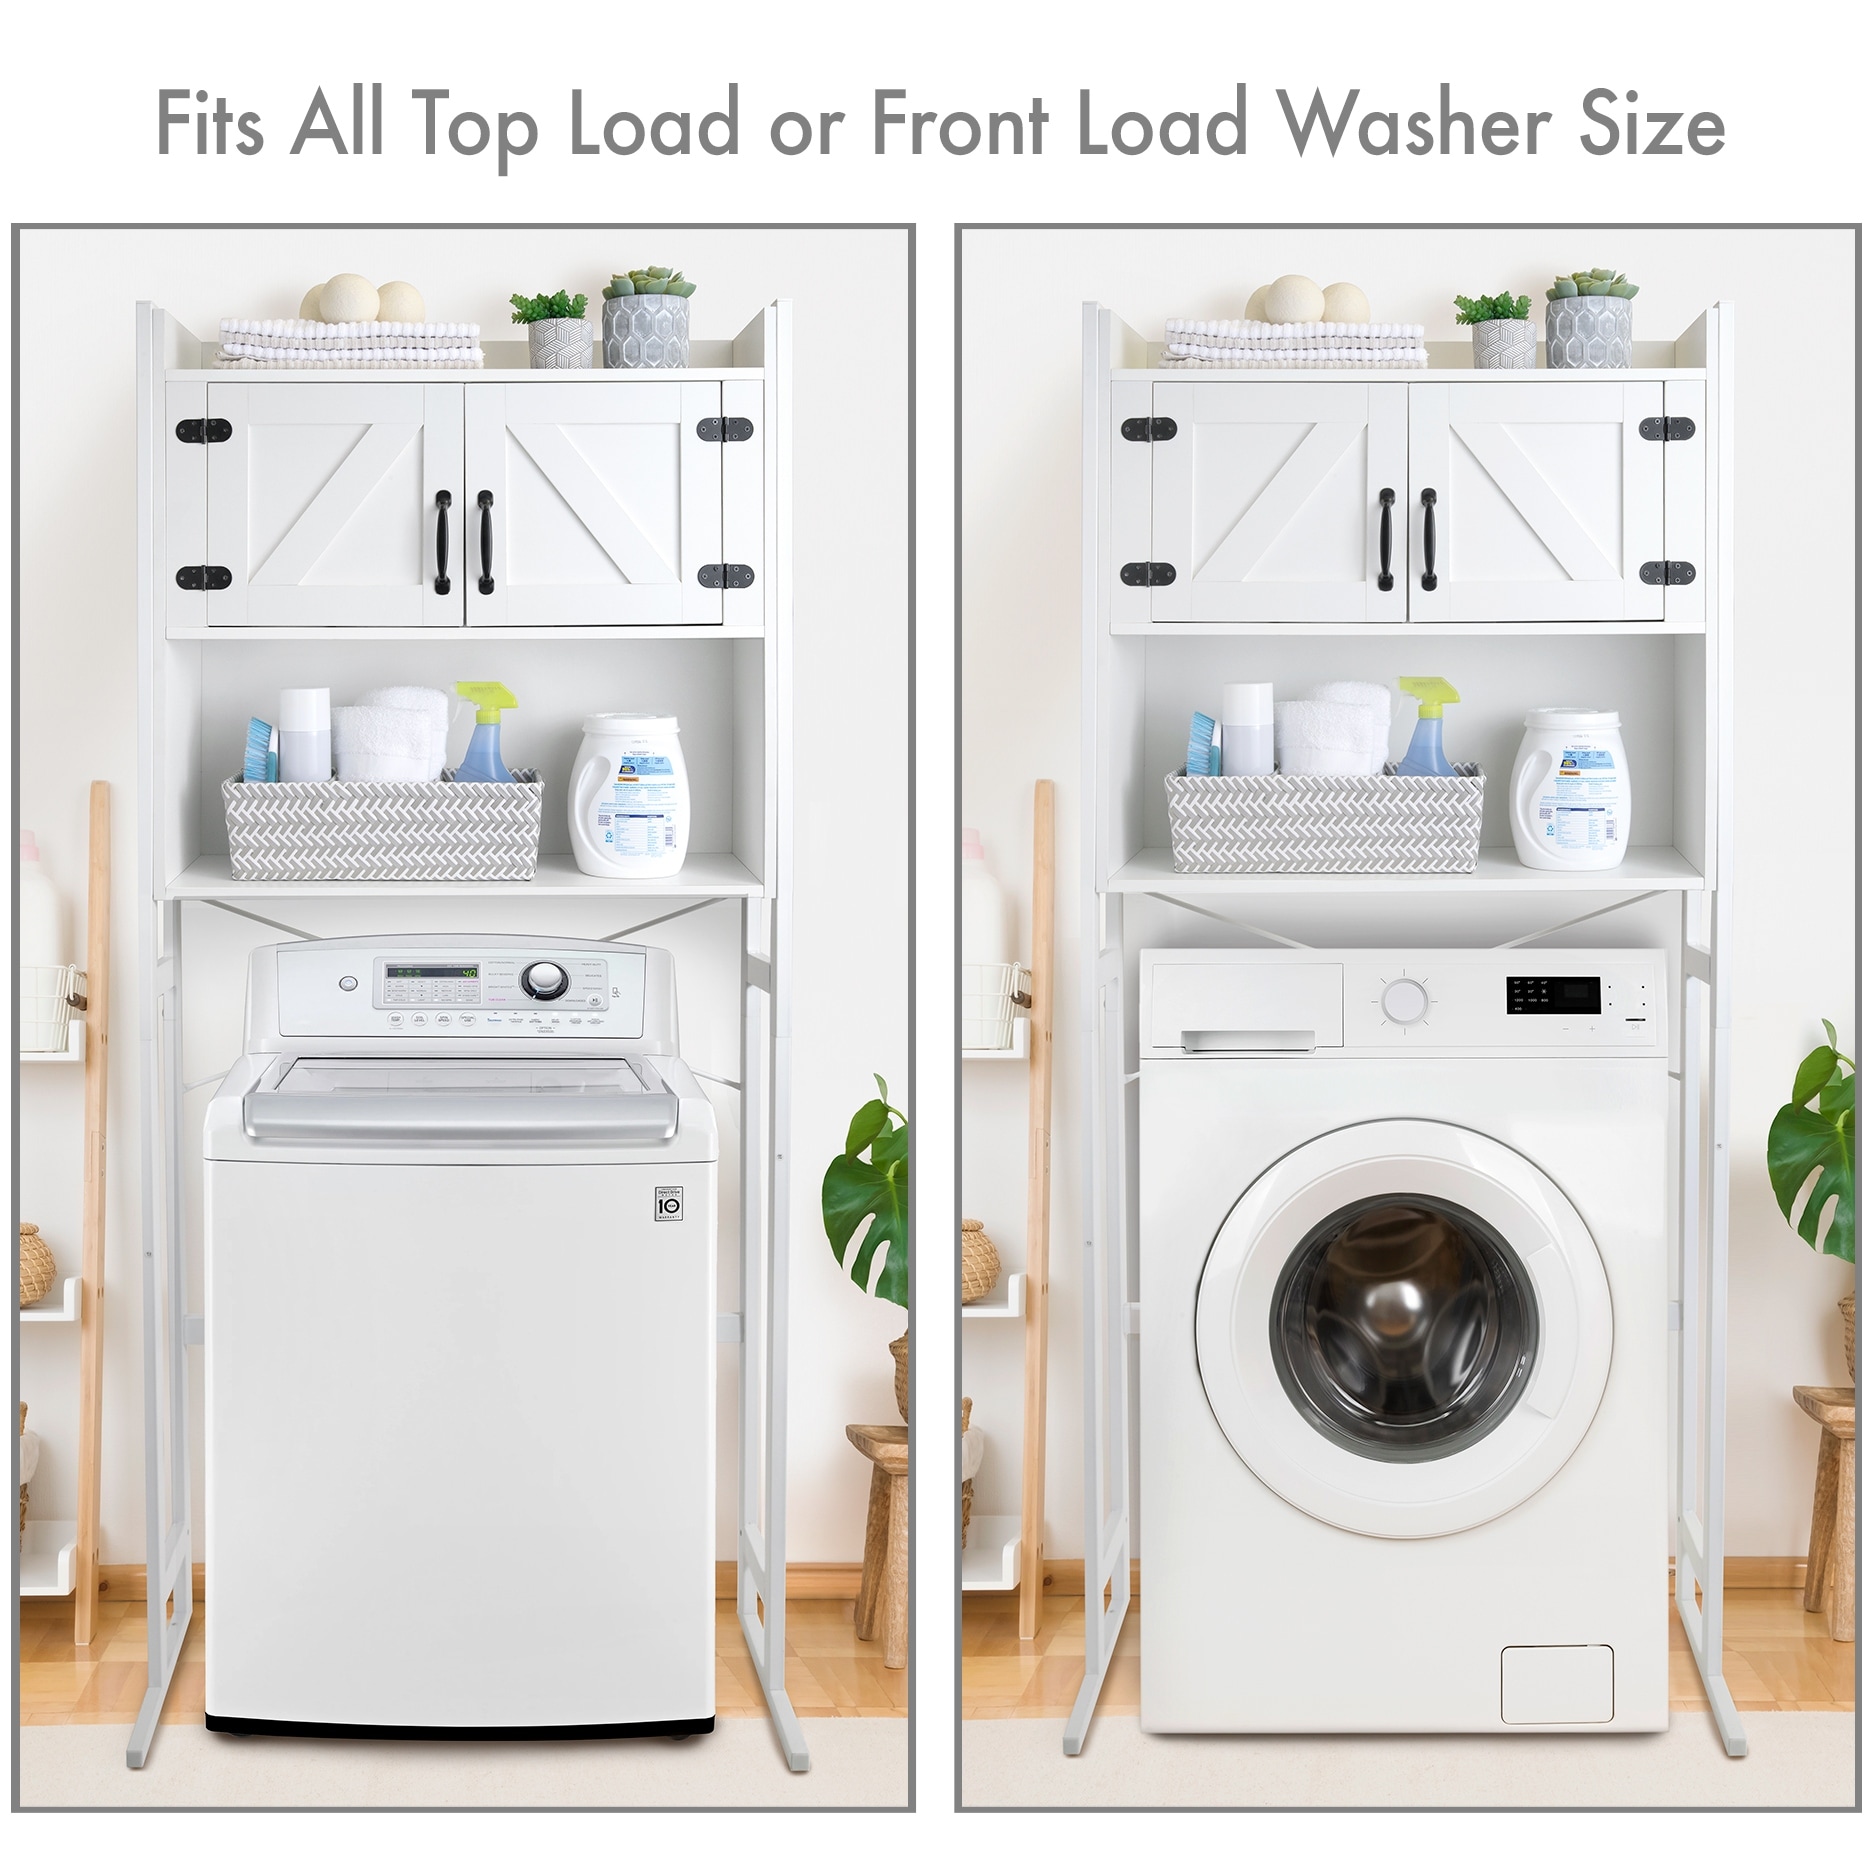 https://ak1.ostkcdn.com/images/products/is/images/direct/991c80828ce1a4714cb470eee749ab75818a1133/Stephan-Roberts-Over-The-Washer-or-Toilet-Storage-Cabinet-w--Height-Adjustable-Shelf%2C-2-Door-Freestanding-Deluxe-Space-Saver.jpg